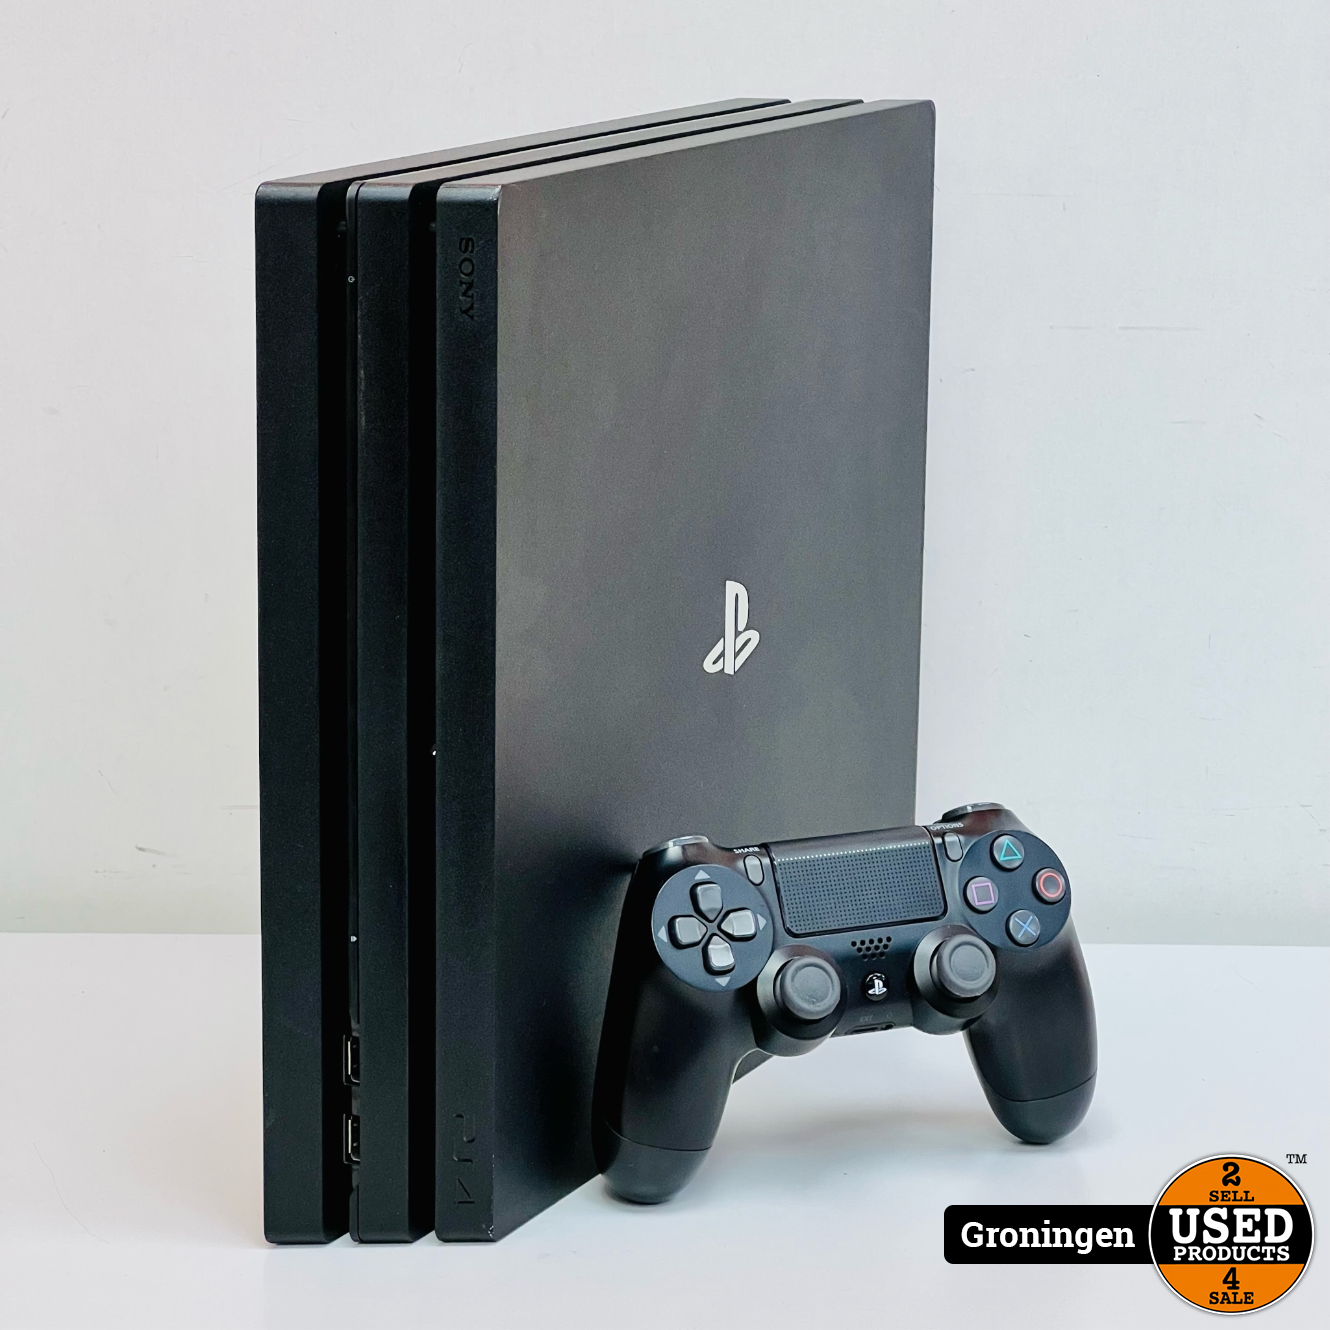 werkplaats invoer Paard PS4] Sony PlayStation 4 PRO 1TB Zwart CUH-7216B | incl. Sony DualShock V2  Controller - Used Products Groningen